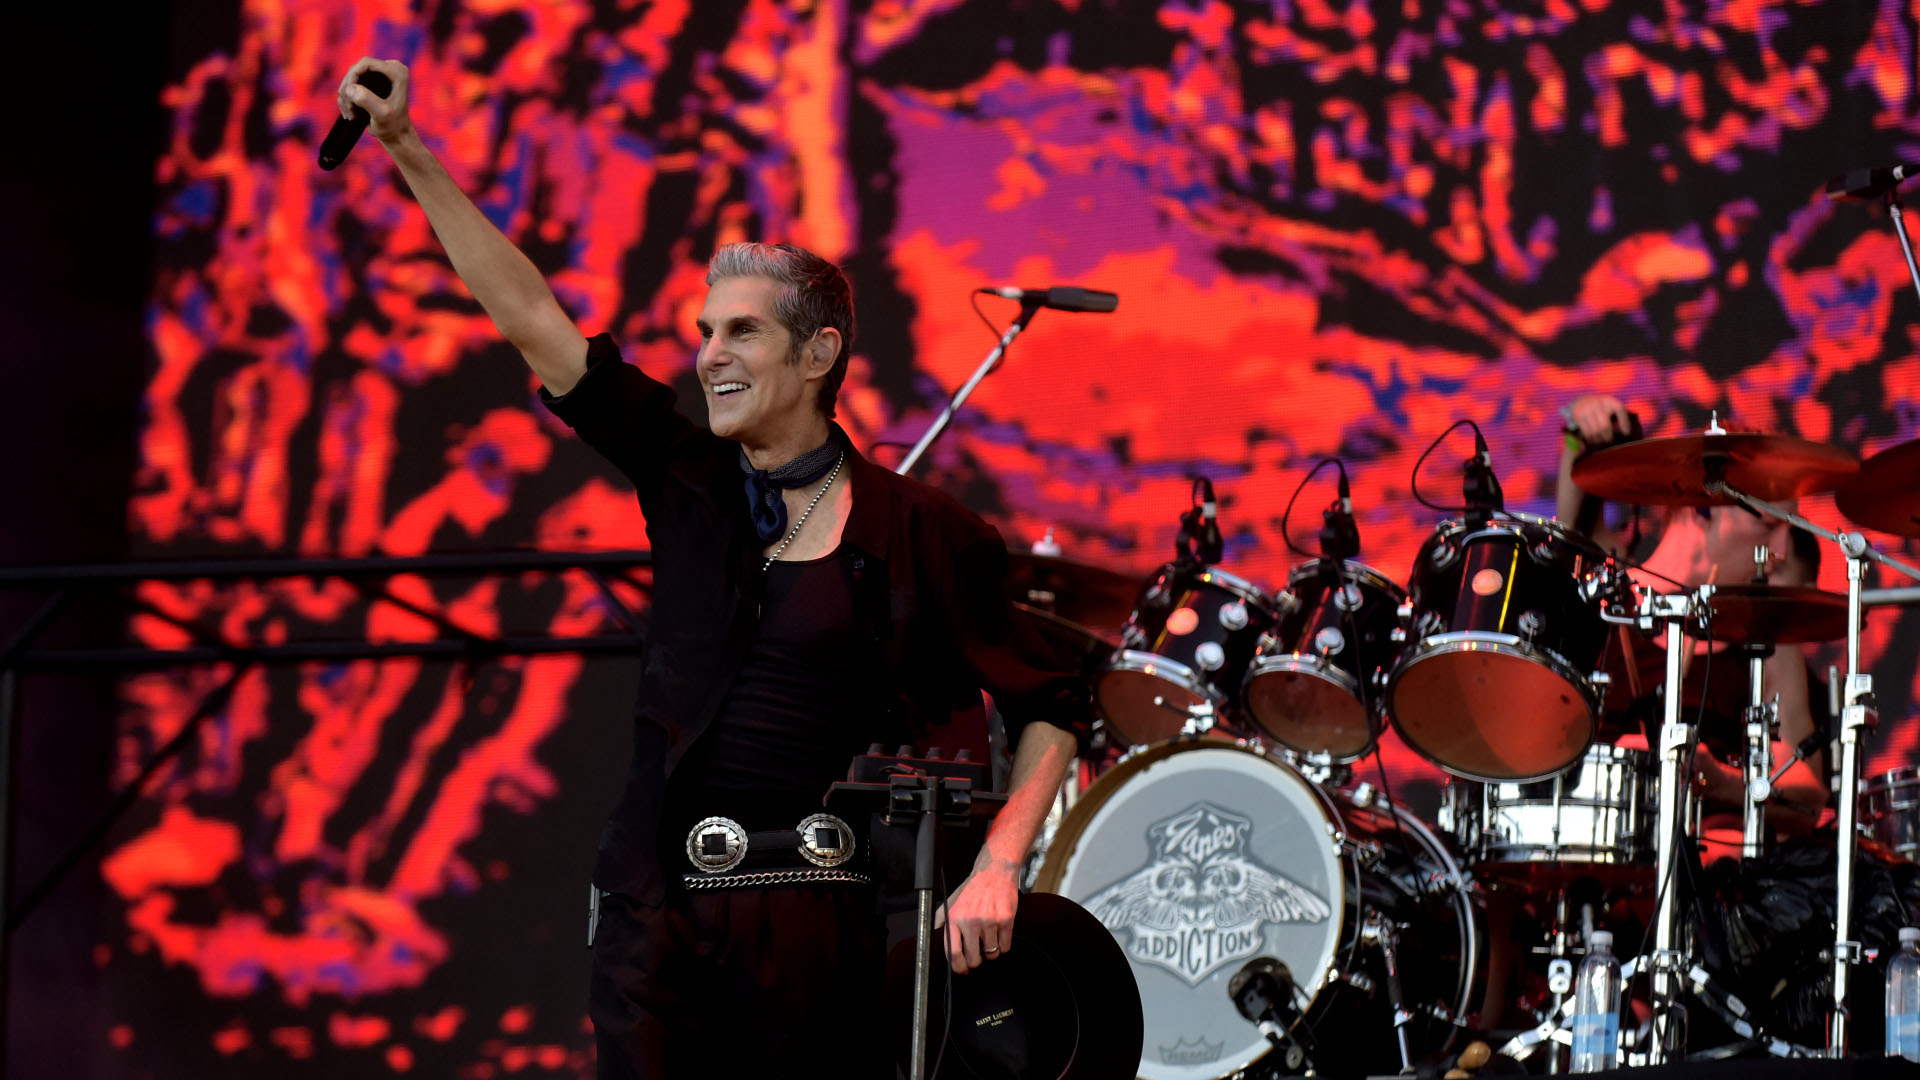 Perry Farrell, frontman of Jane's Addiction